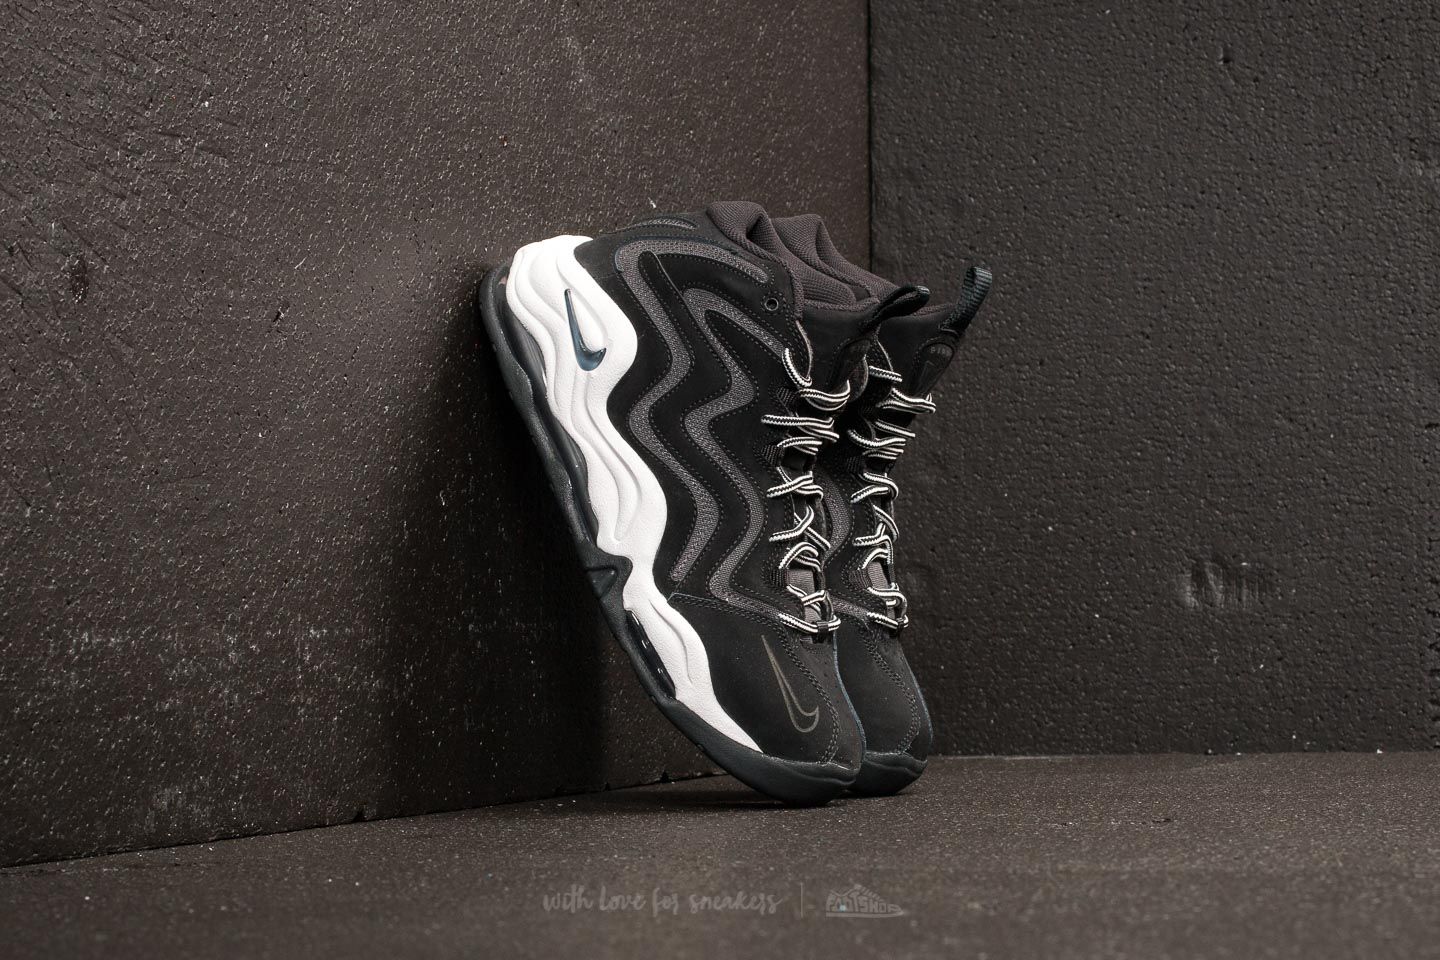 Chaussures et baskets homme Nike Air Pippen Black/ Anthracite-Vast Grey